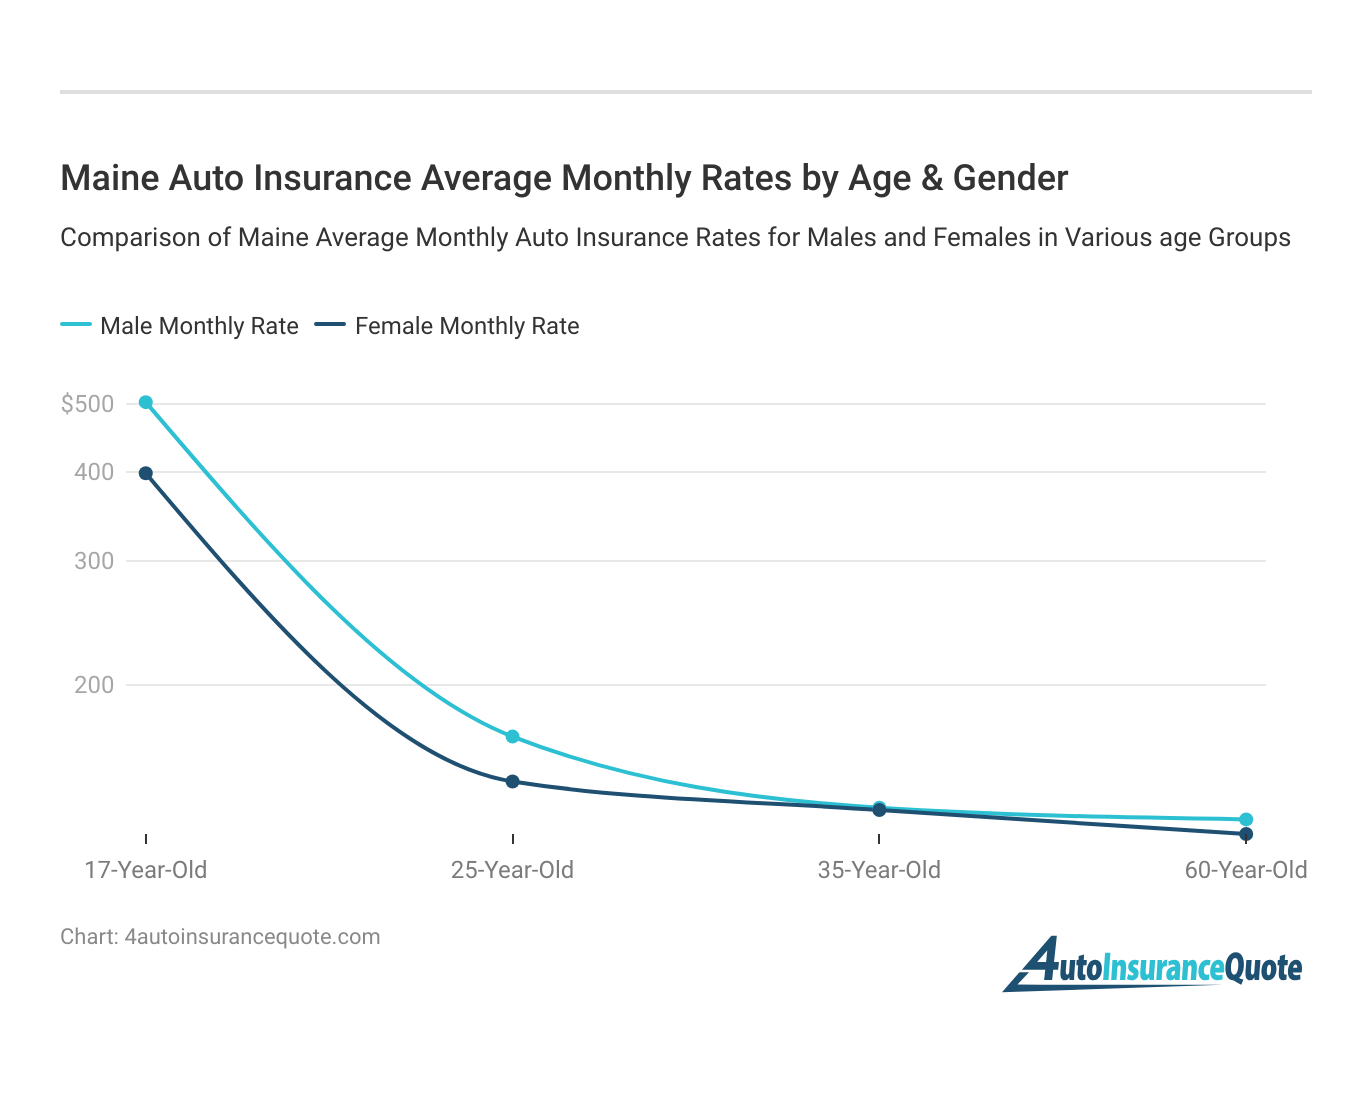 <h3>Maine Auto Insurance Average Monthly Rates by Age & Gender</h3>